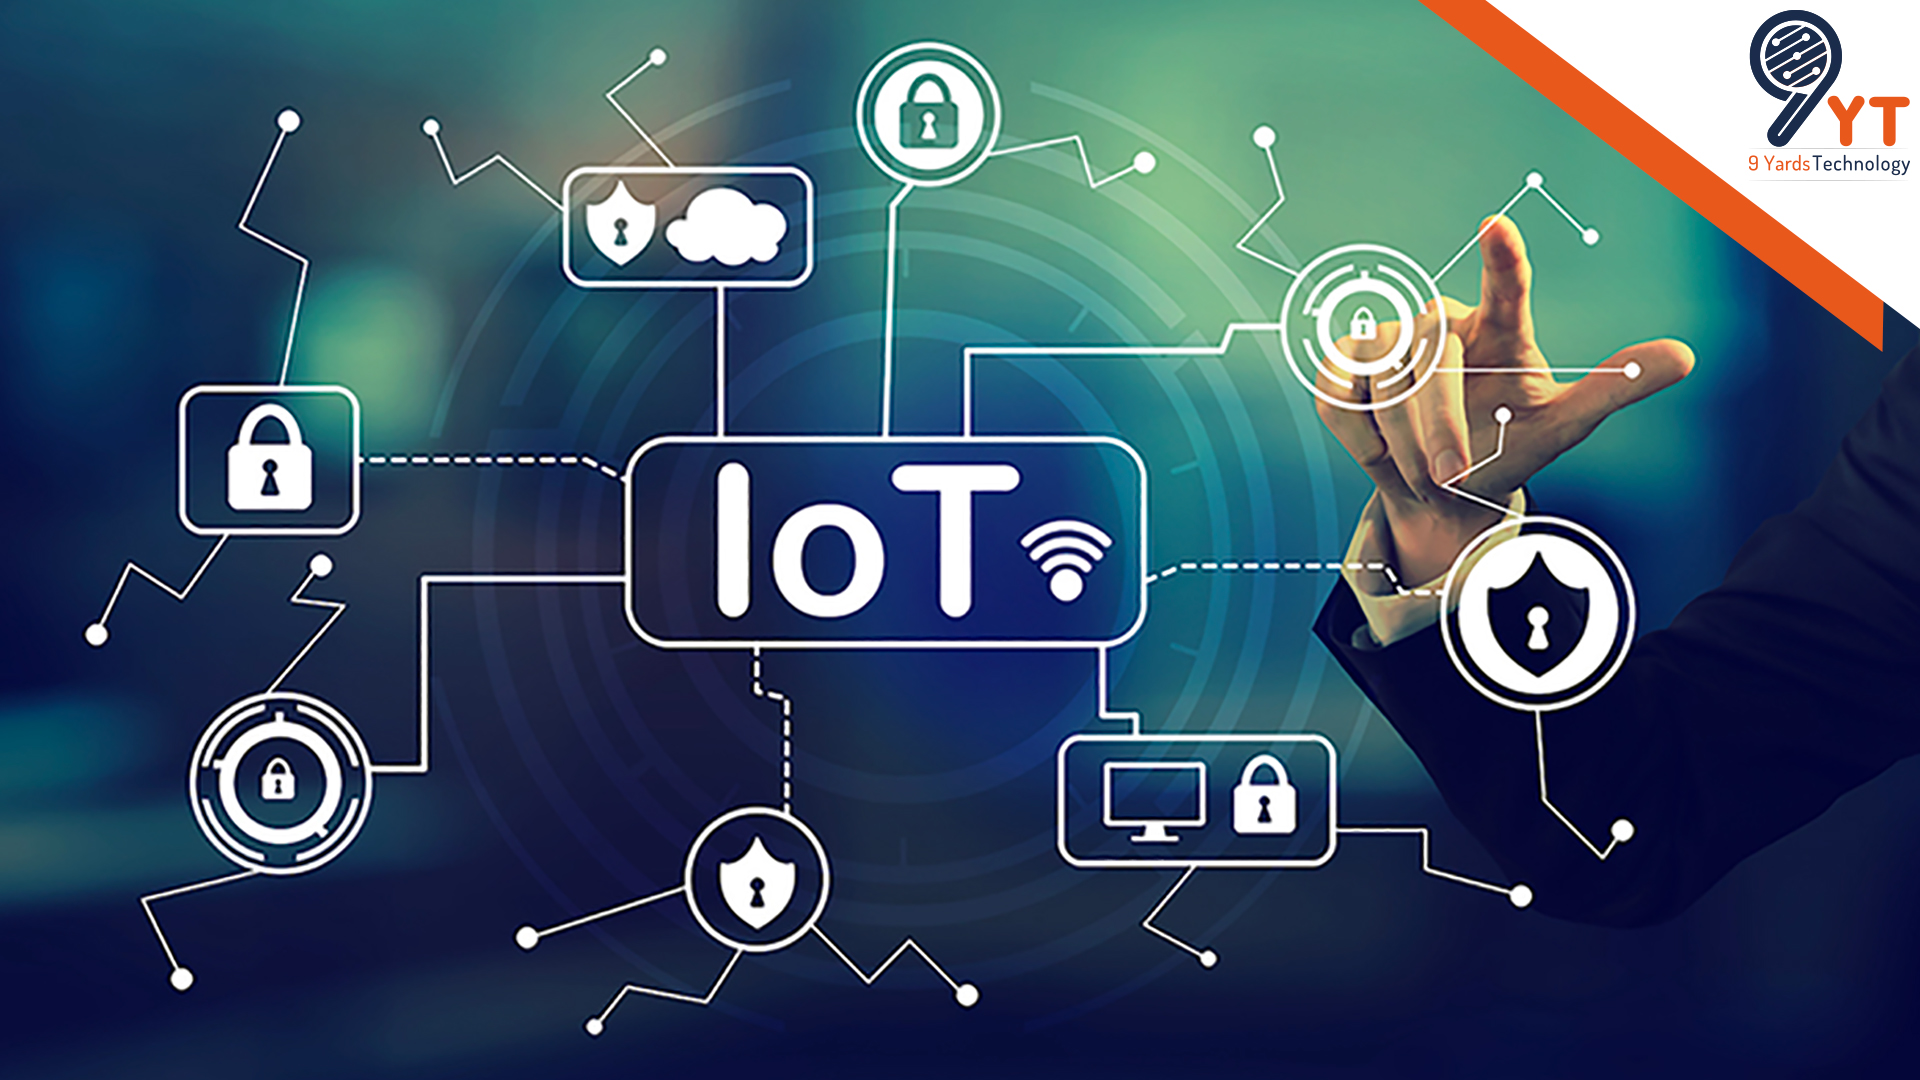 Know About The Internet of Things (IoT) And IoT Testing